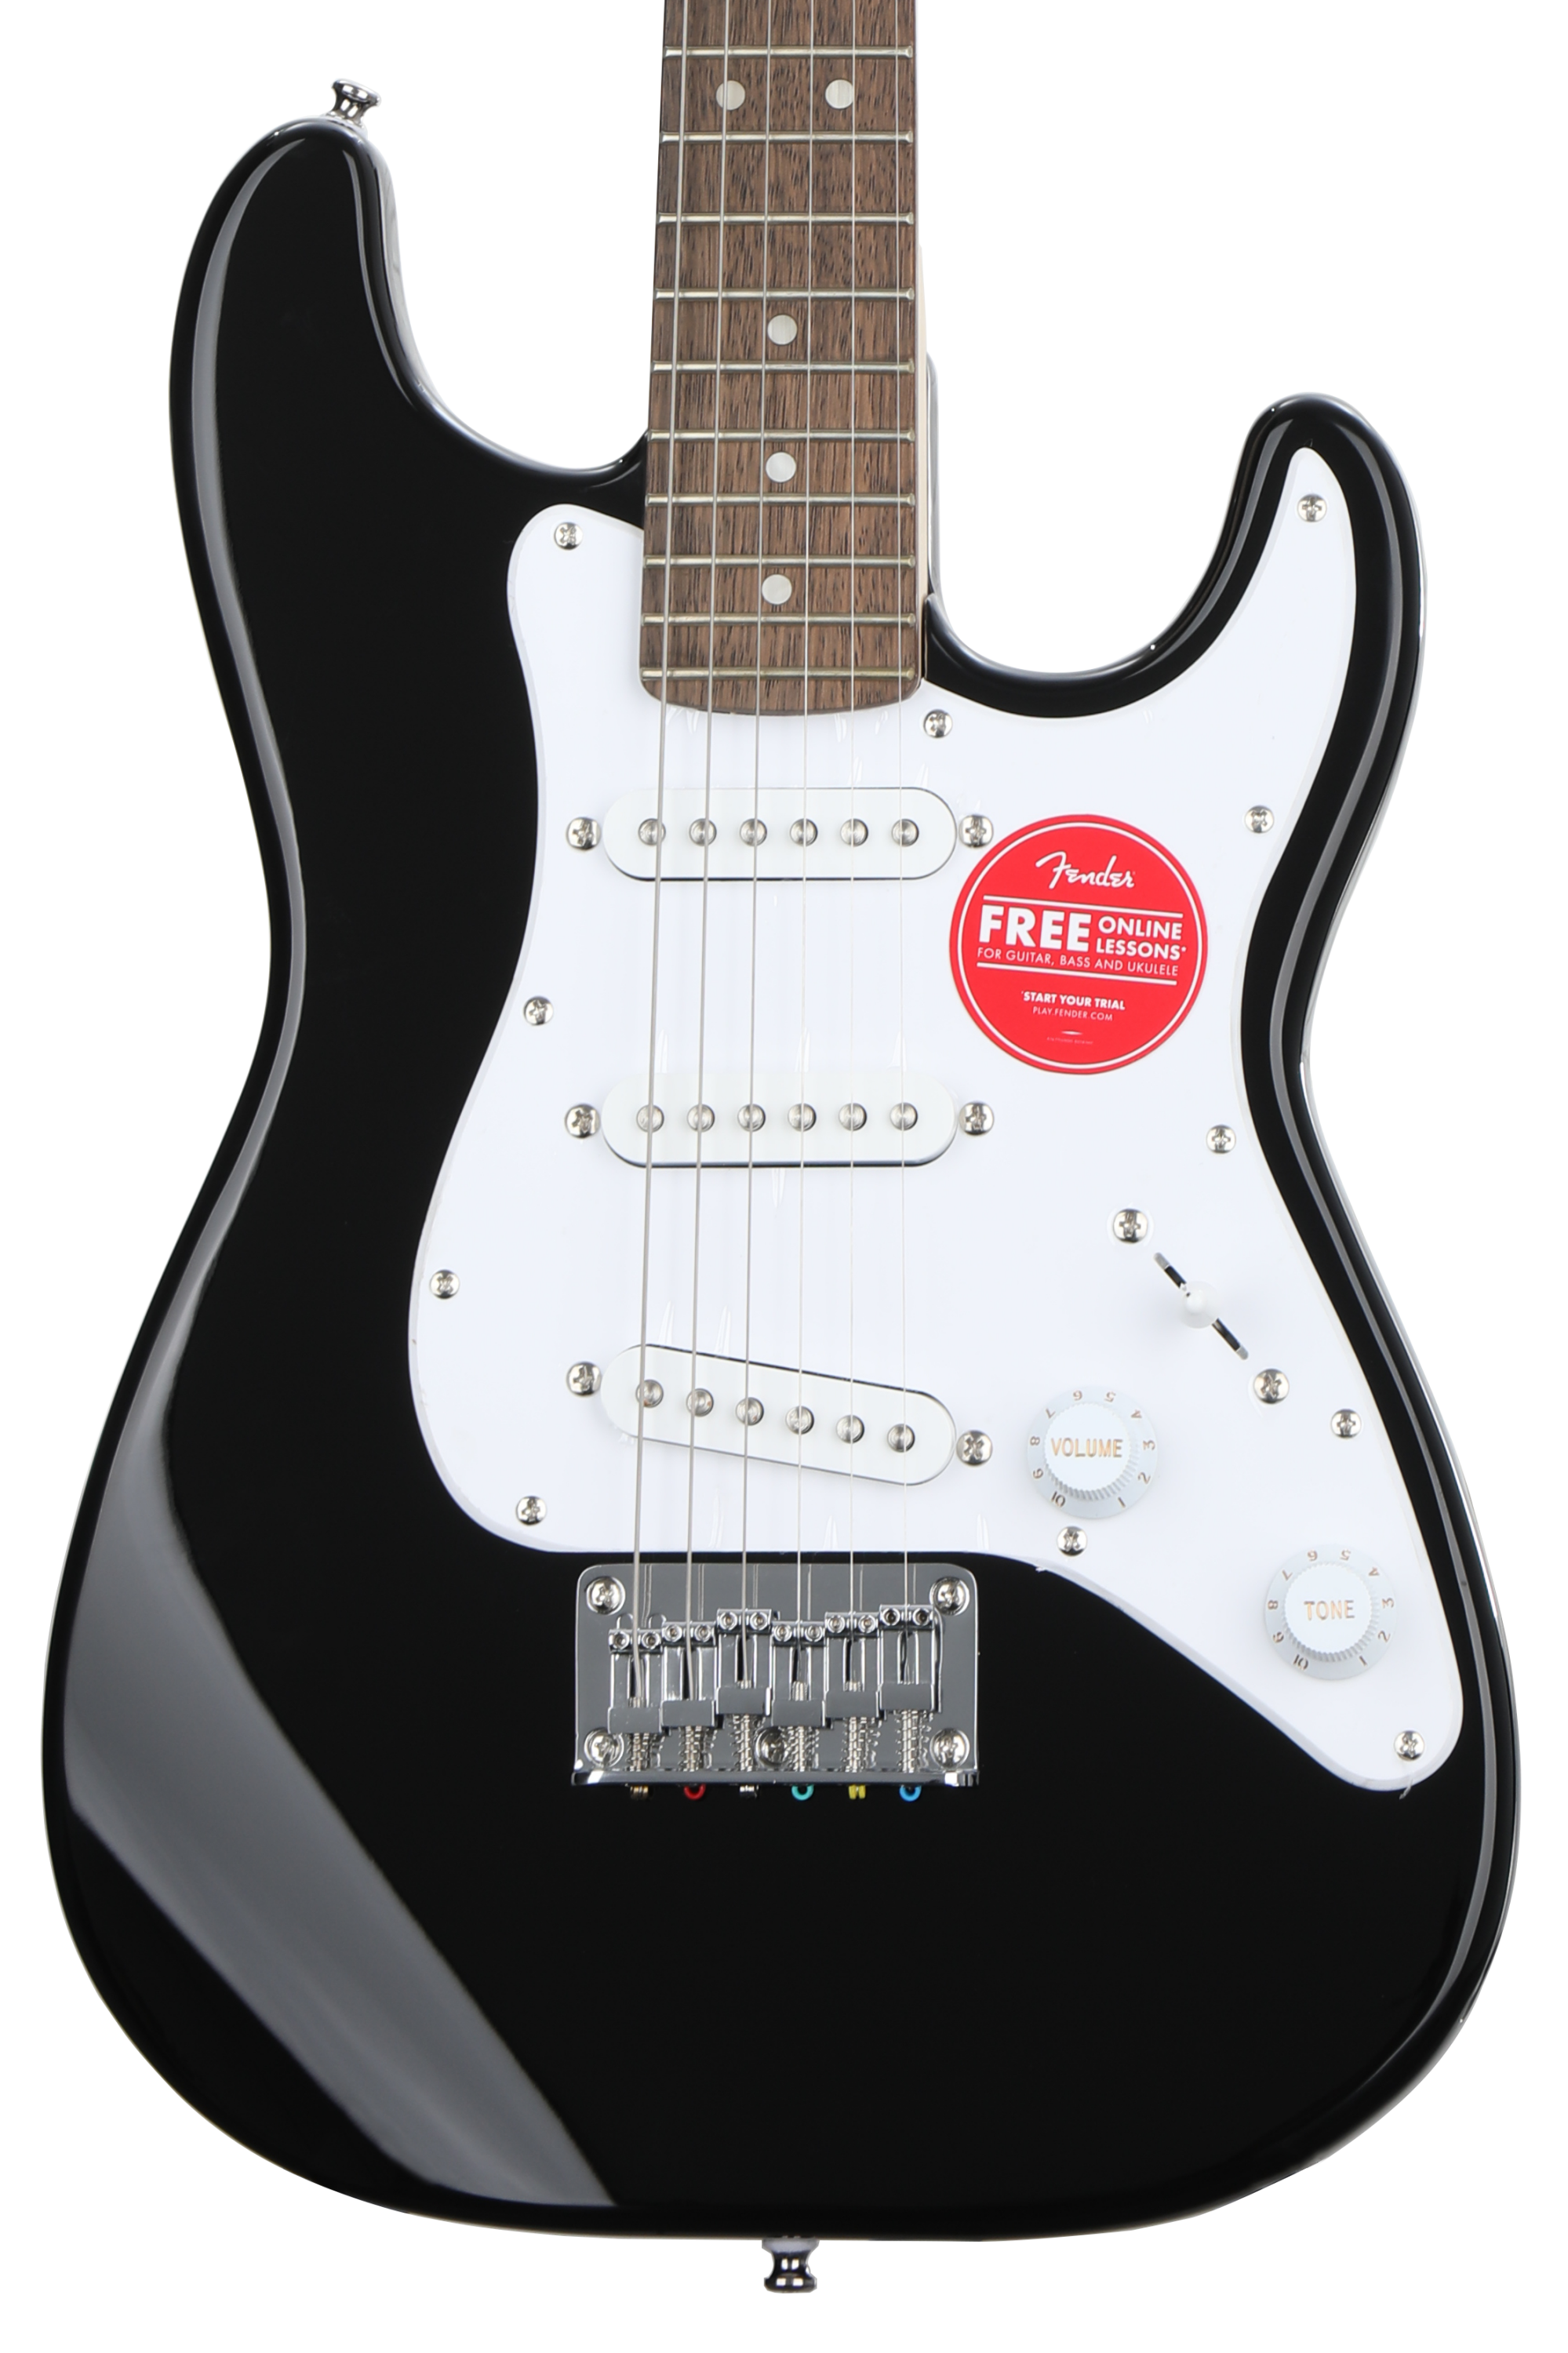 Squier Mini Stratocaster Electric Guitar - Black with Laurel Fingerboard